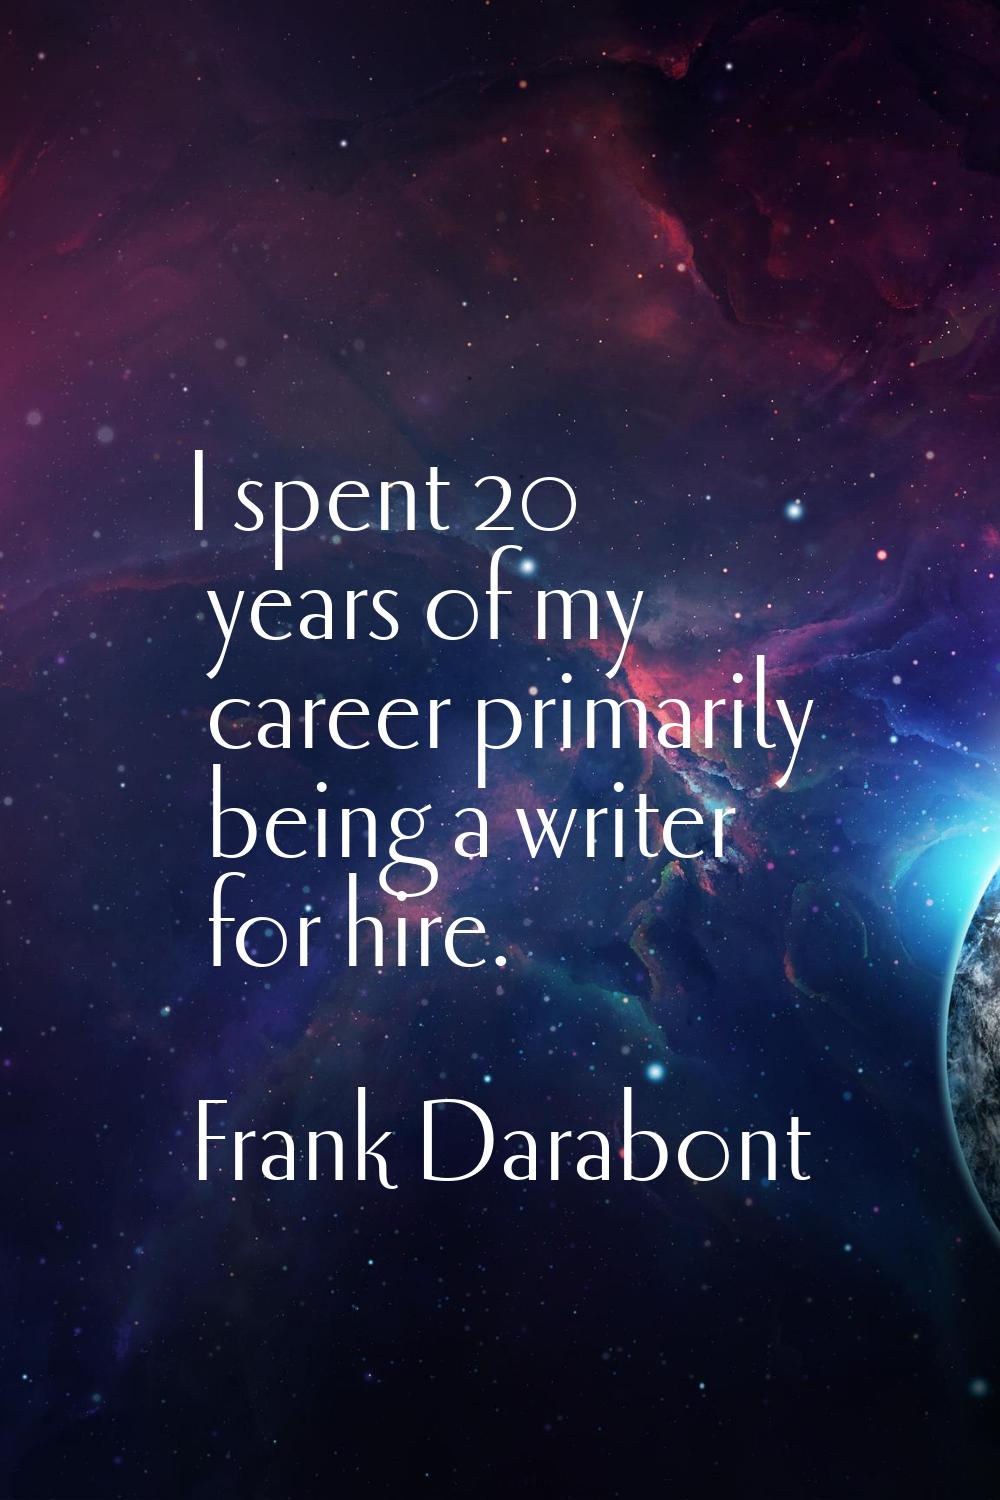 I spent 20 years of my career primarily being a writer for hire.